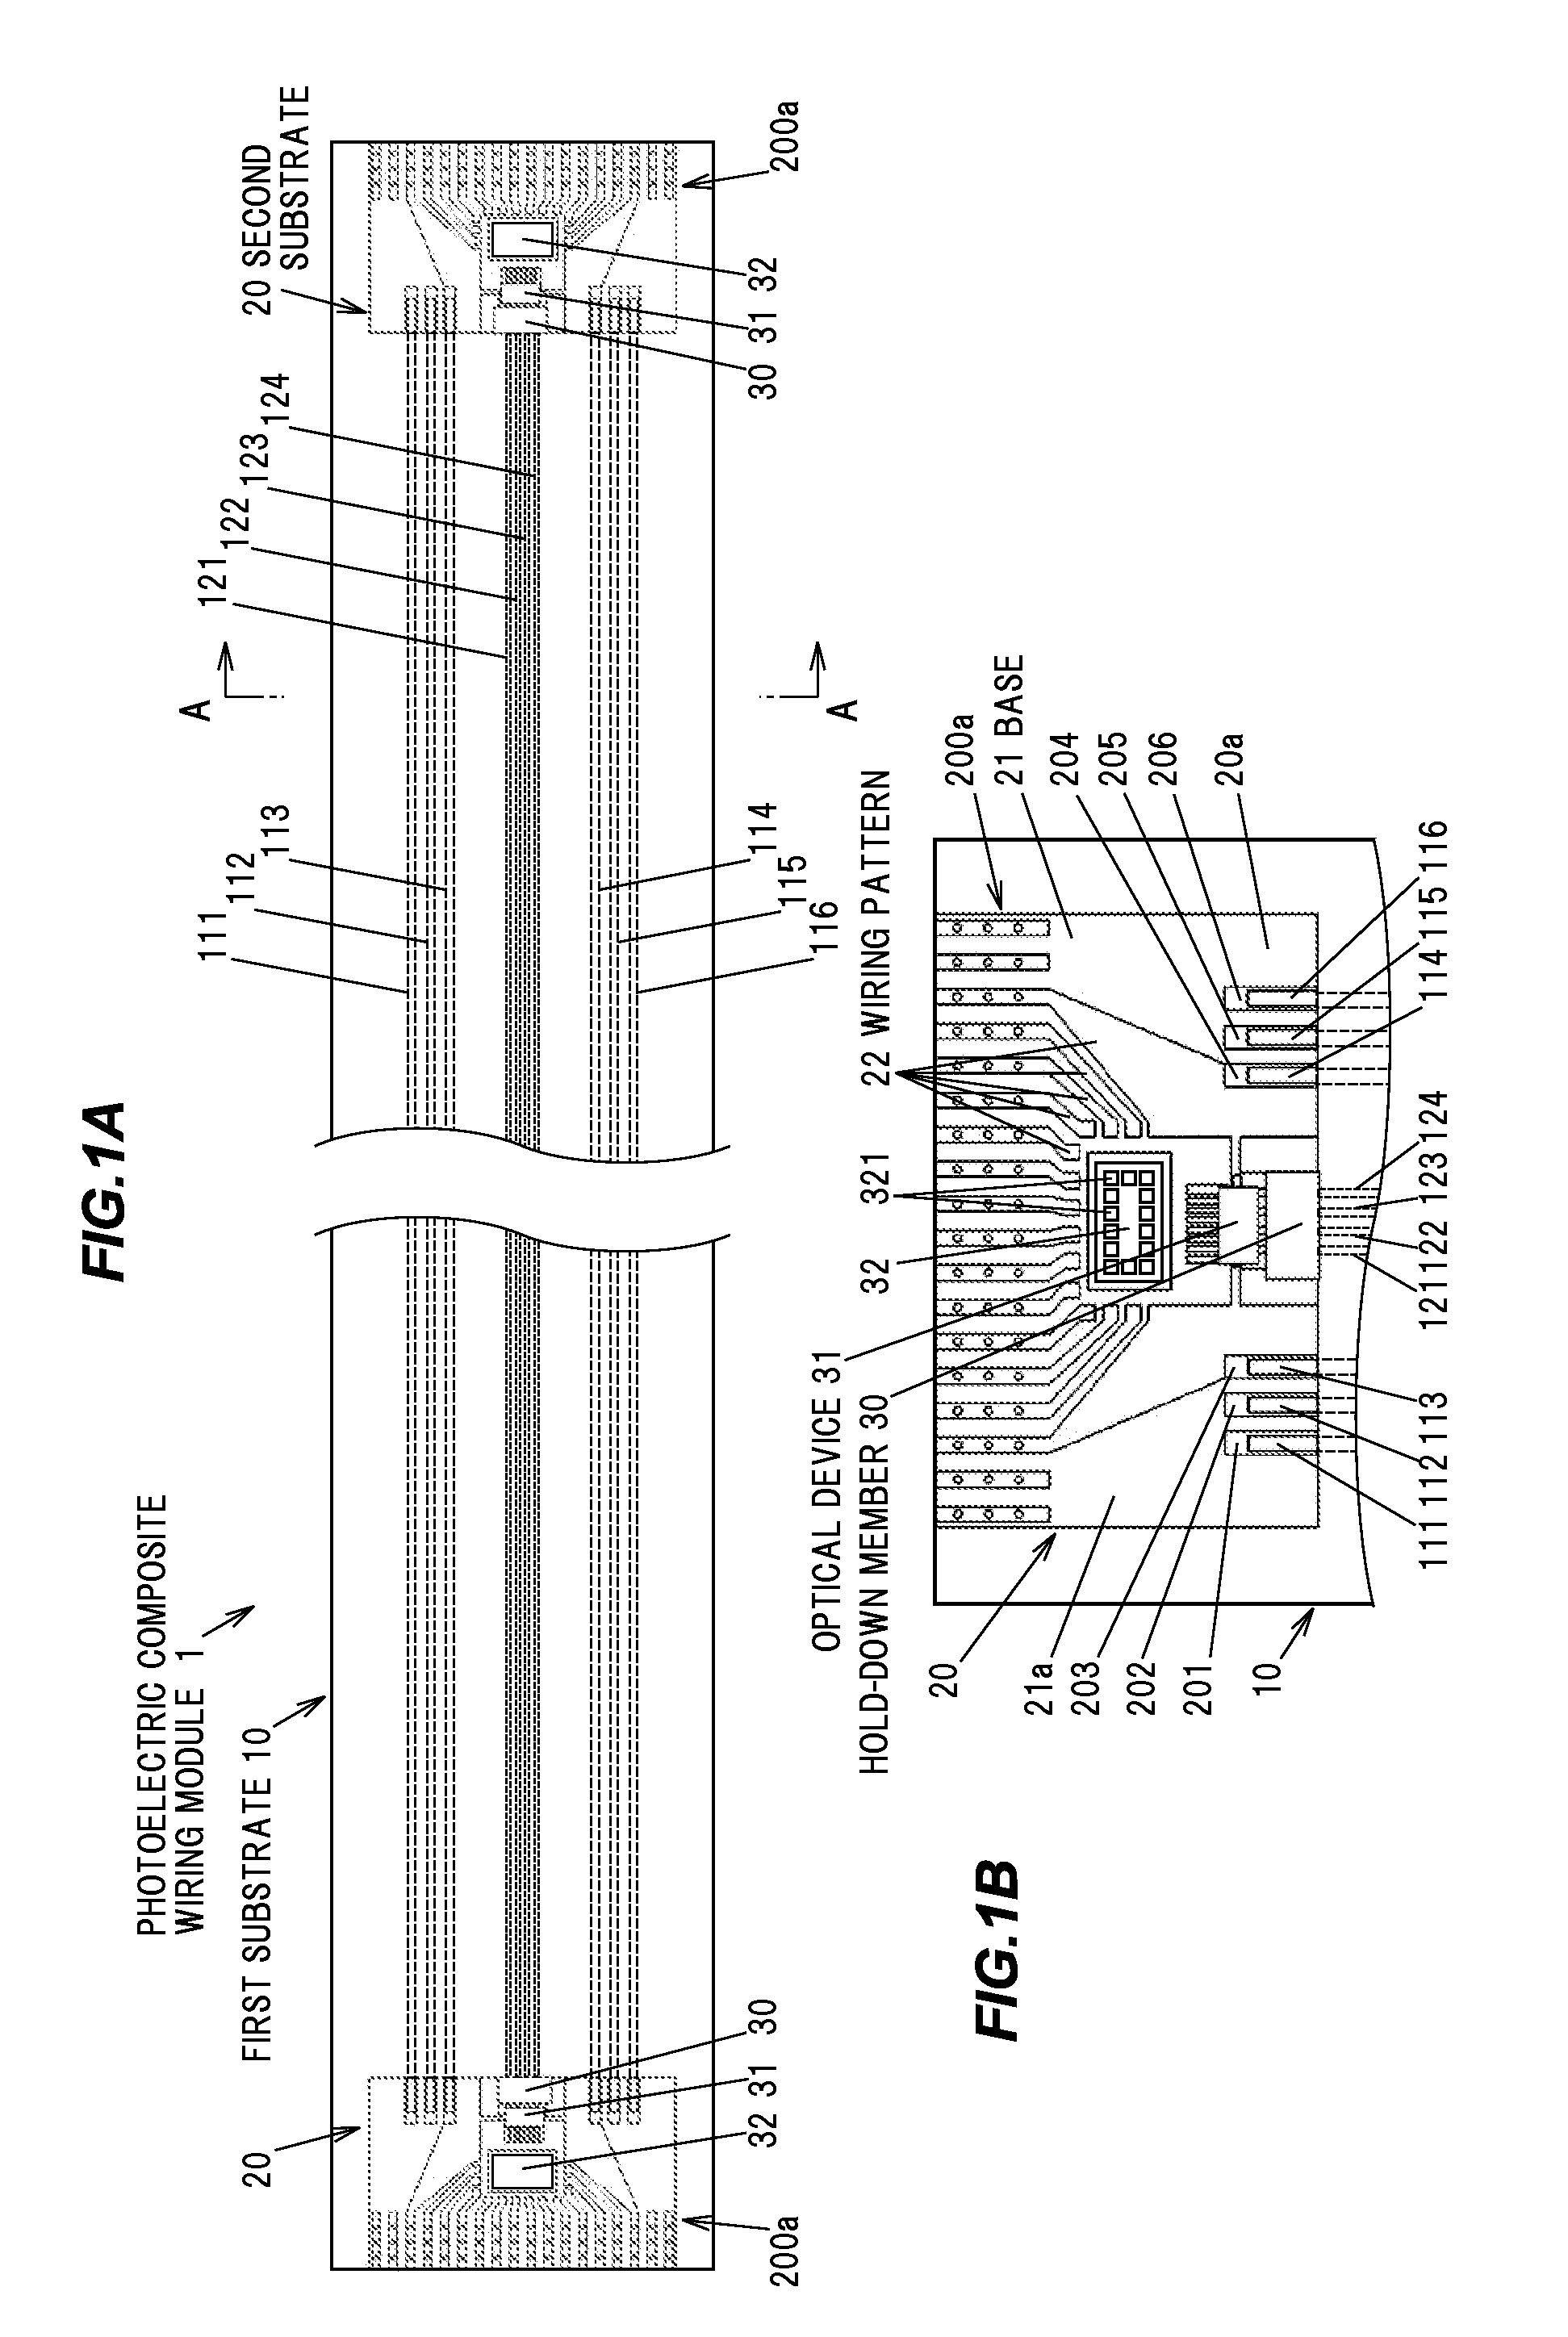 Photoelectric composite wiring module